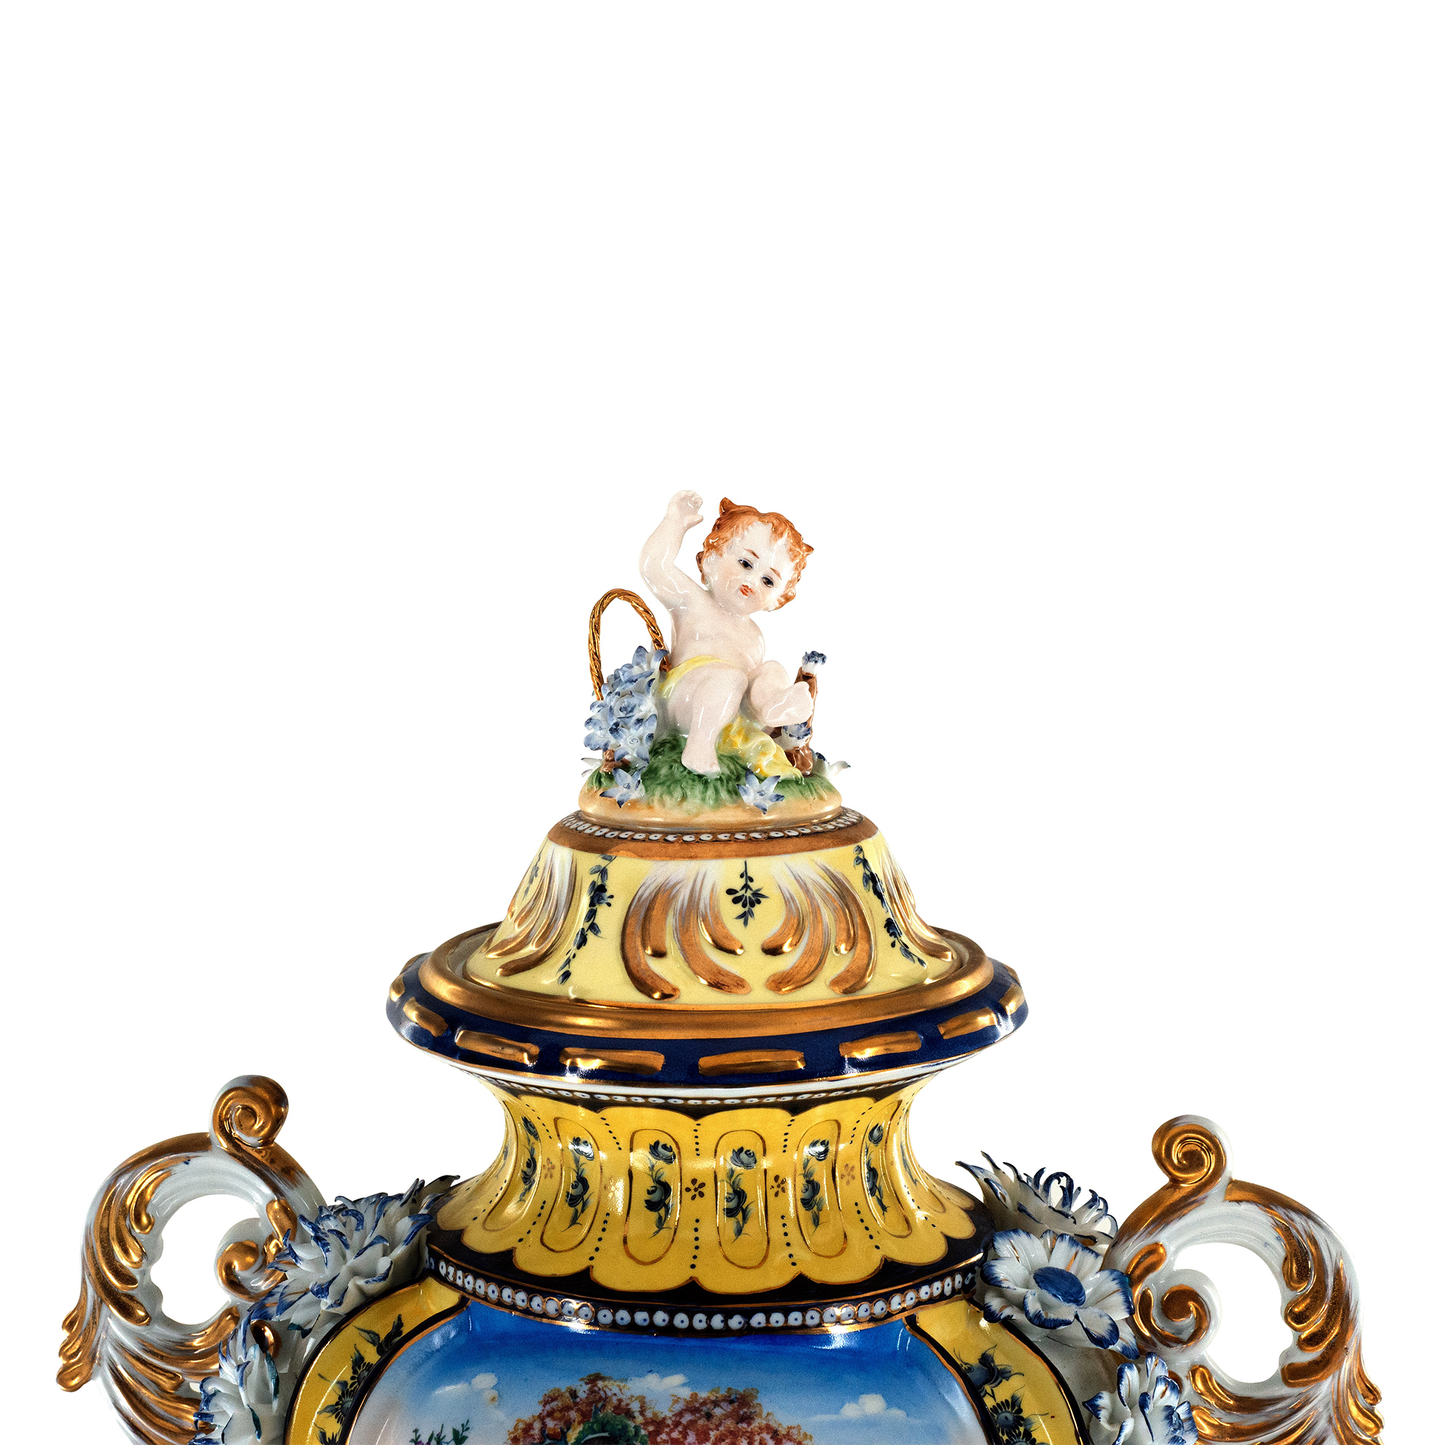 Rococo Hand-painted Three Dimensional Porcelain Flower Urn